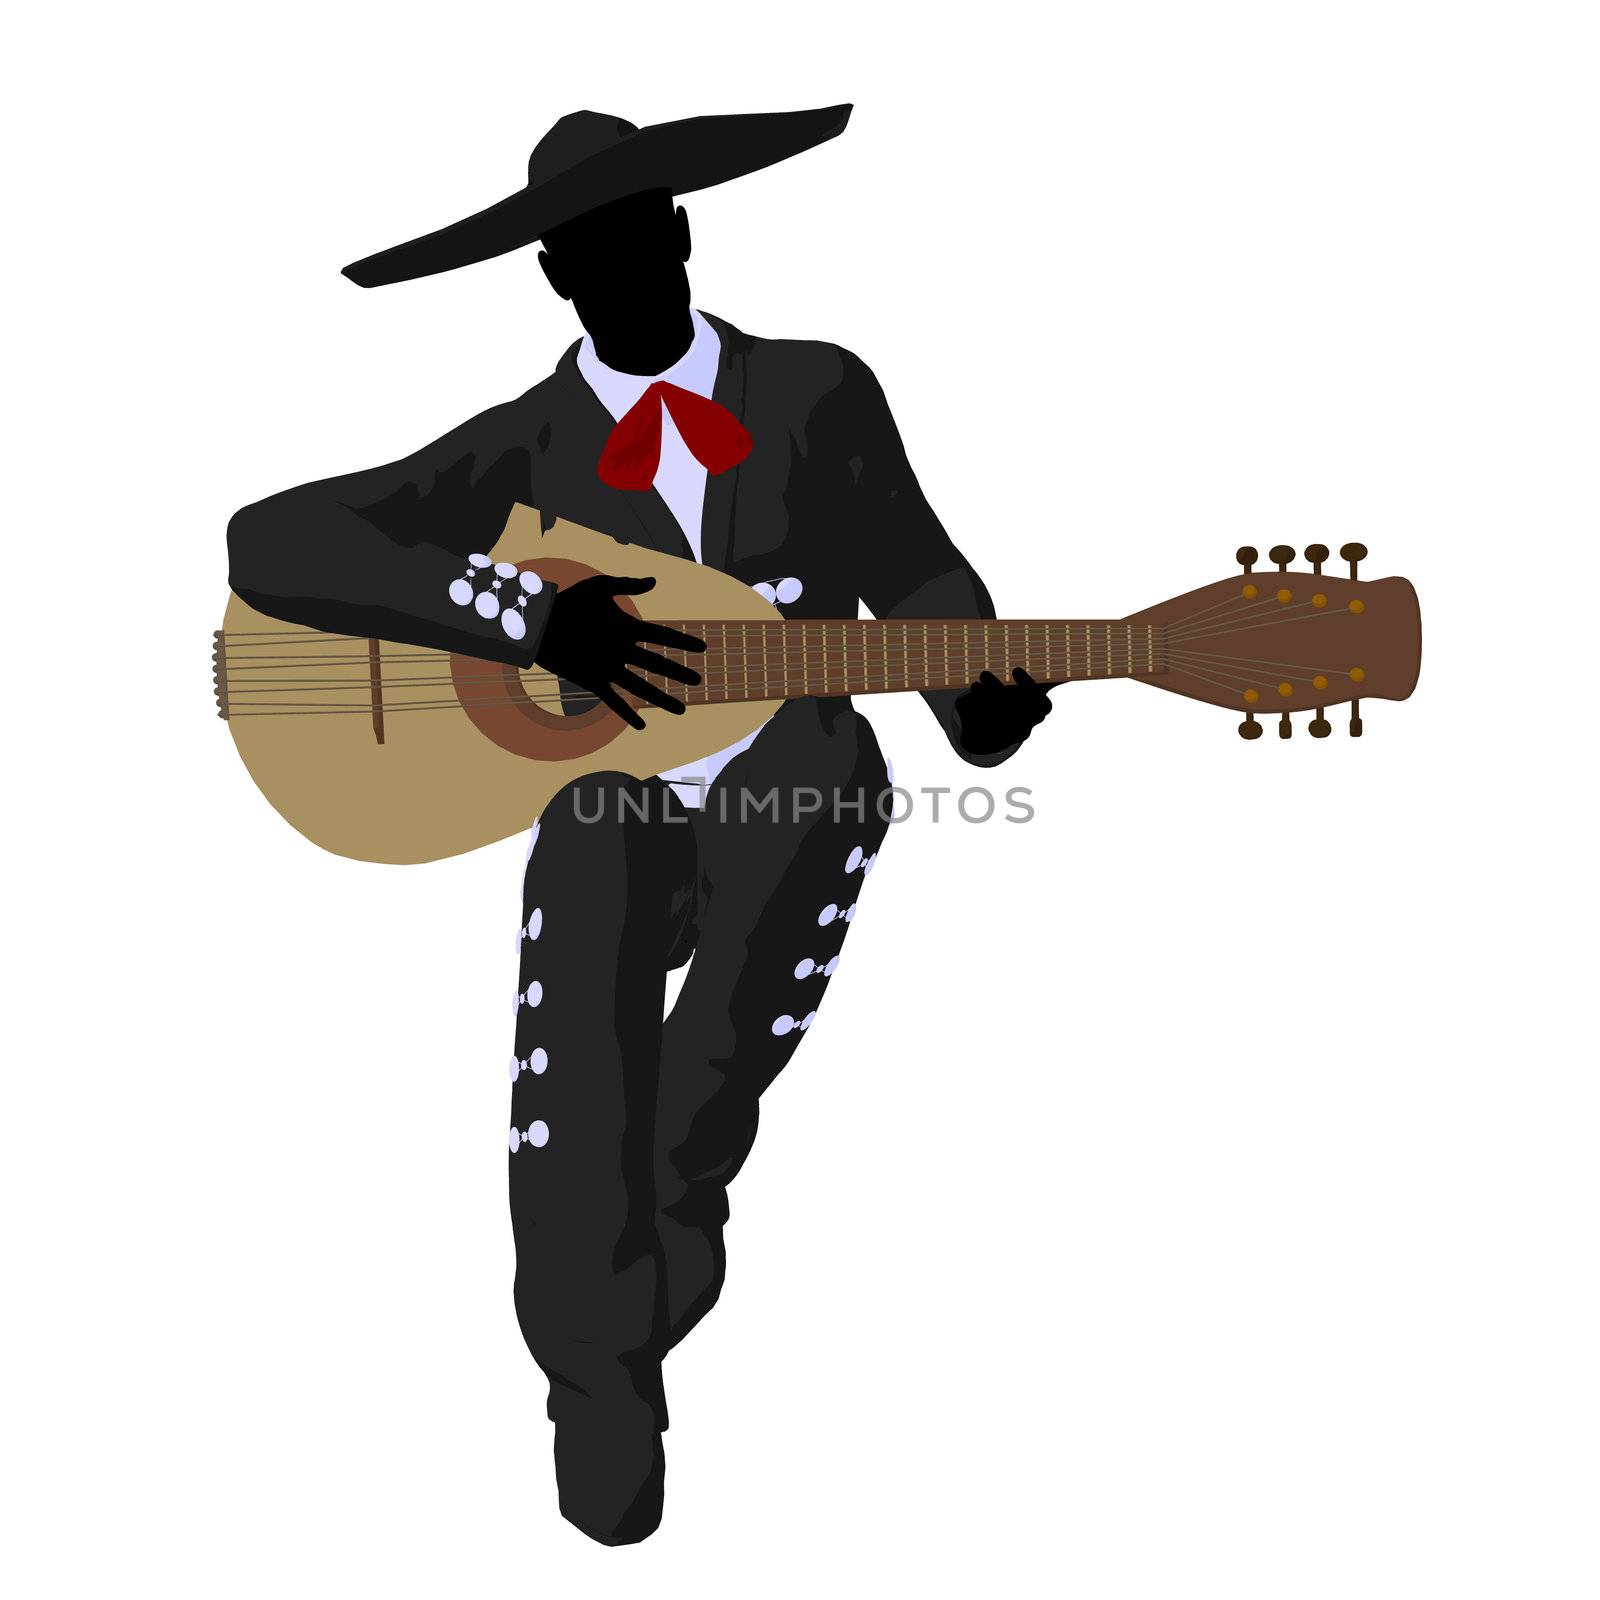 Male mariachi with a guitar illustration silhouette illustration on a white background